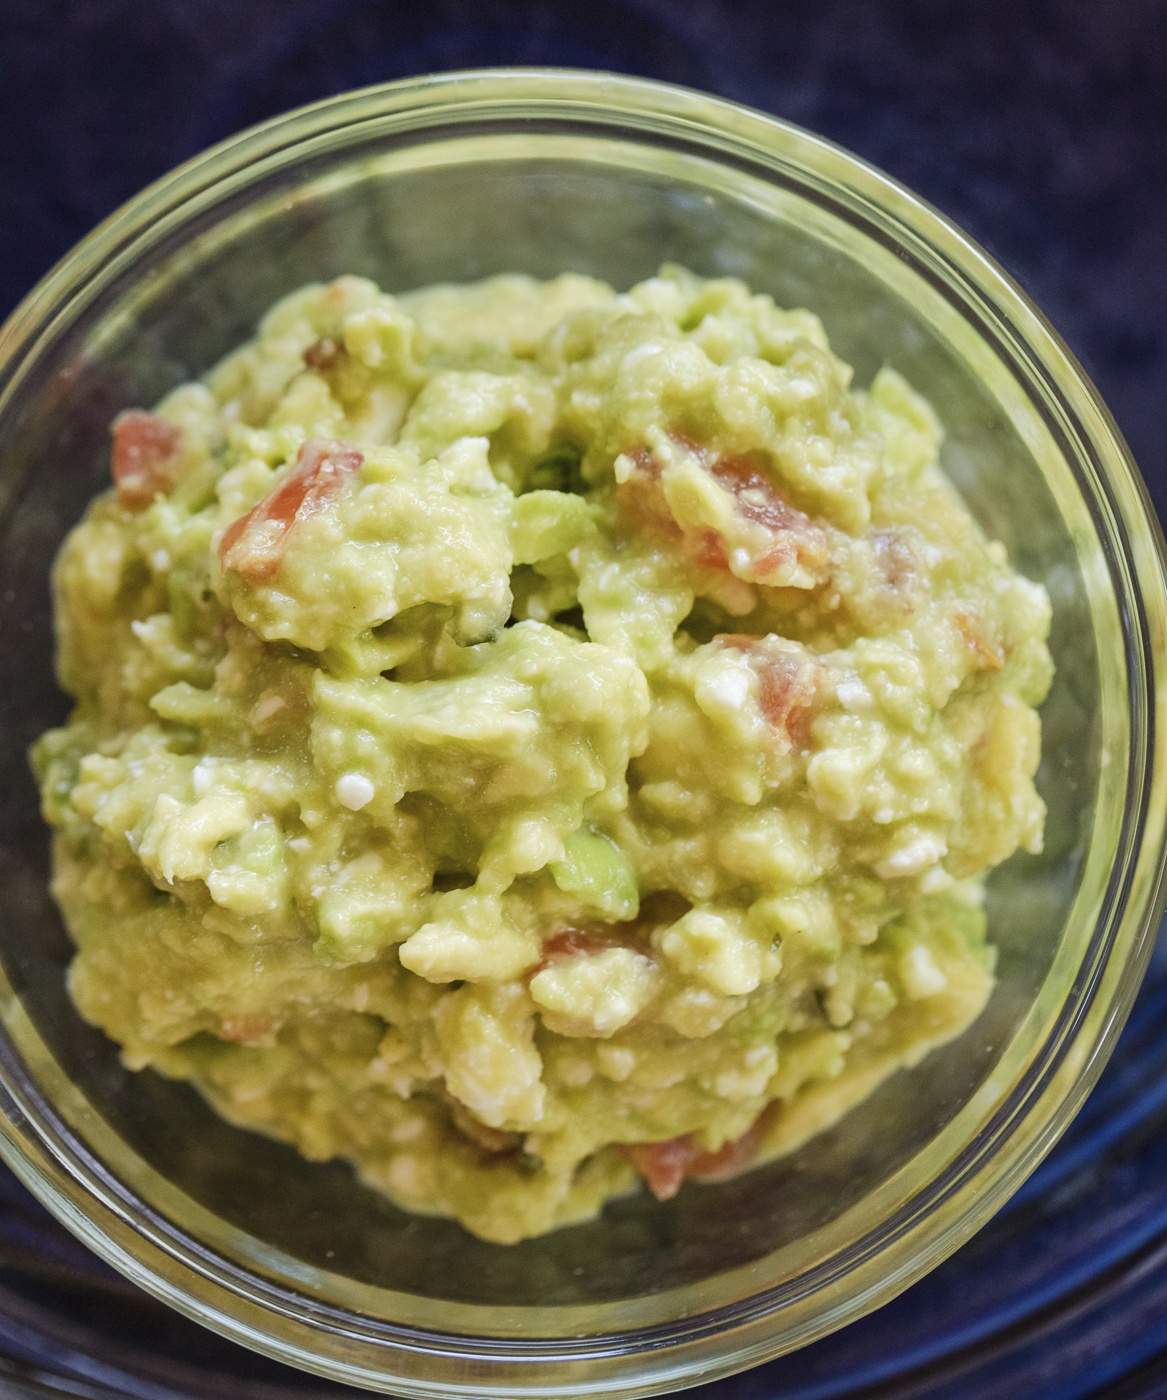 chunky avocado guacamole with tomato, cheese and serrano chile in a glass bowl